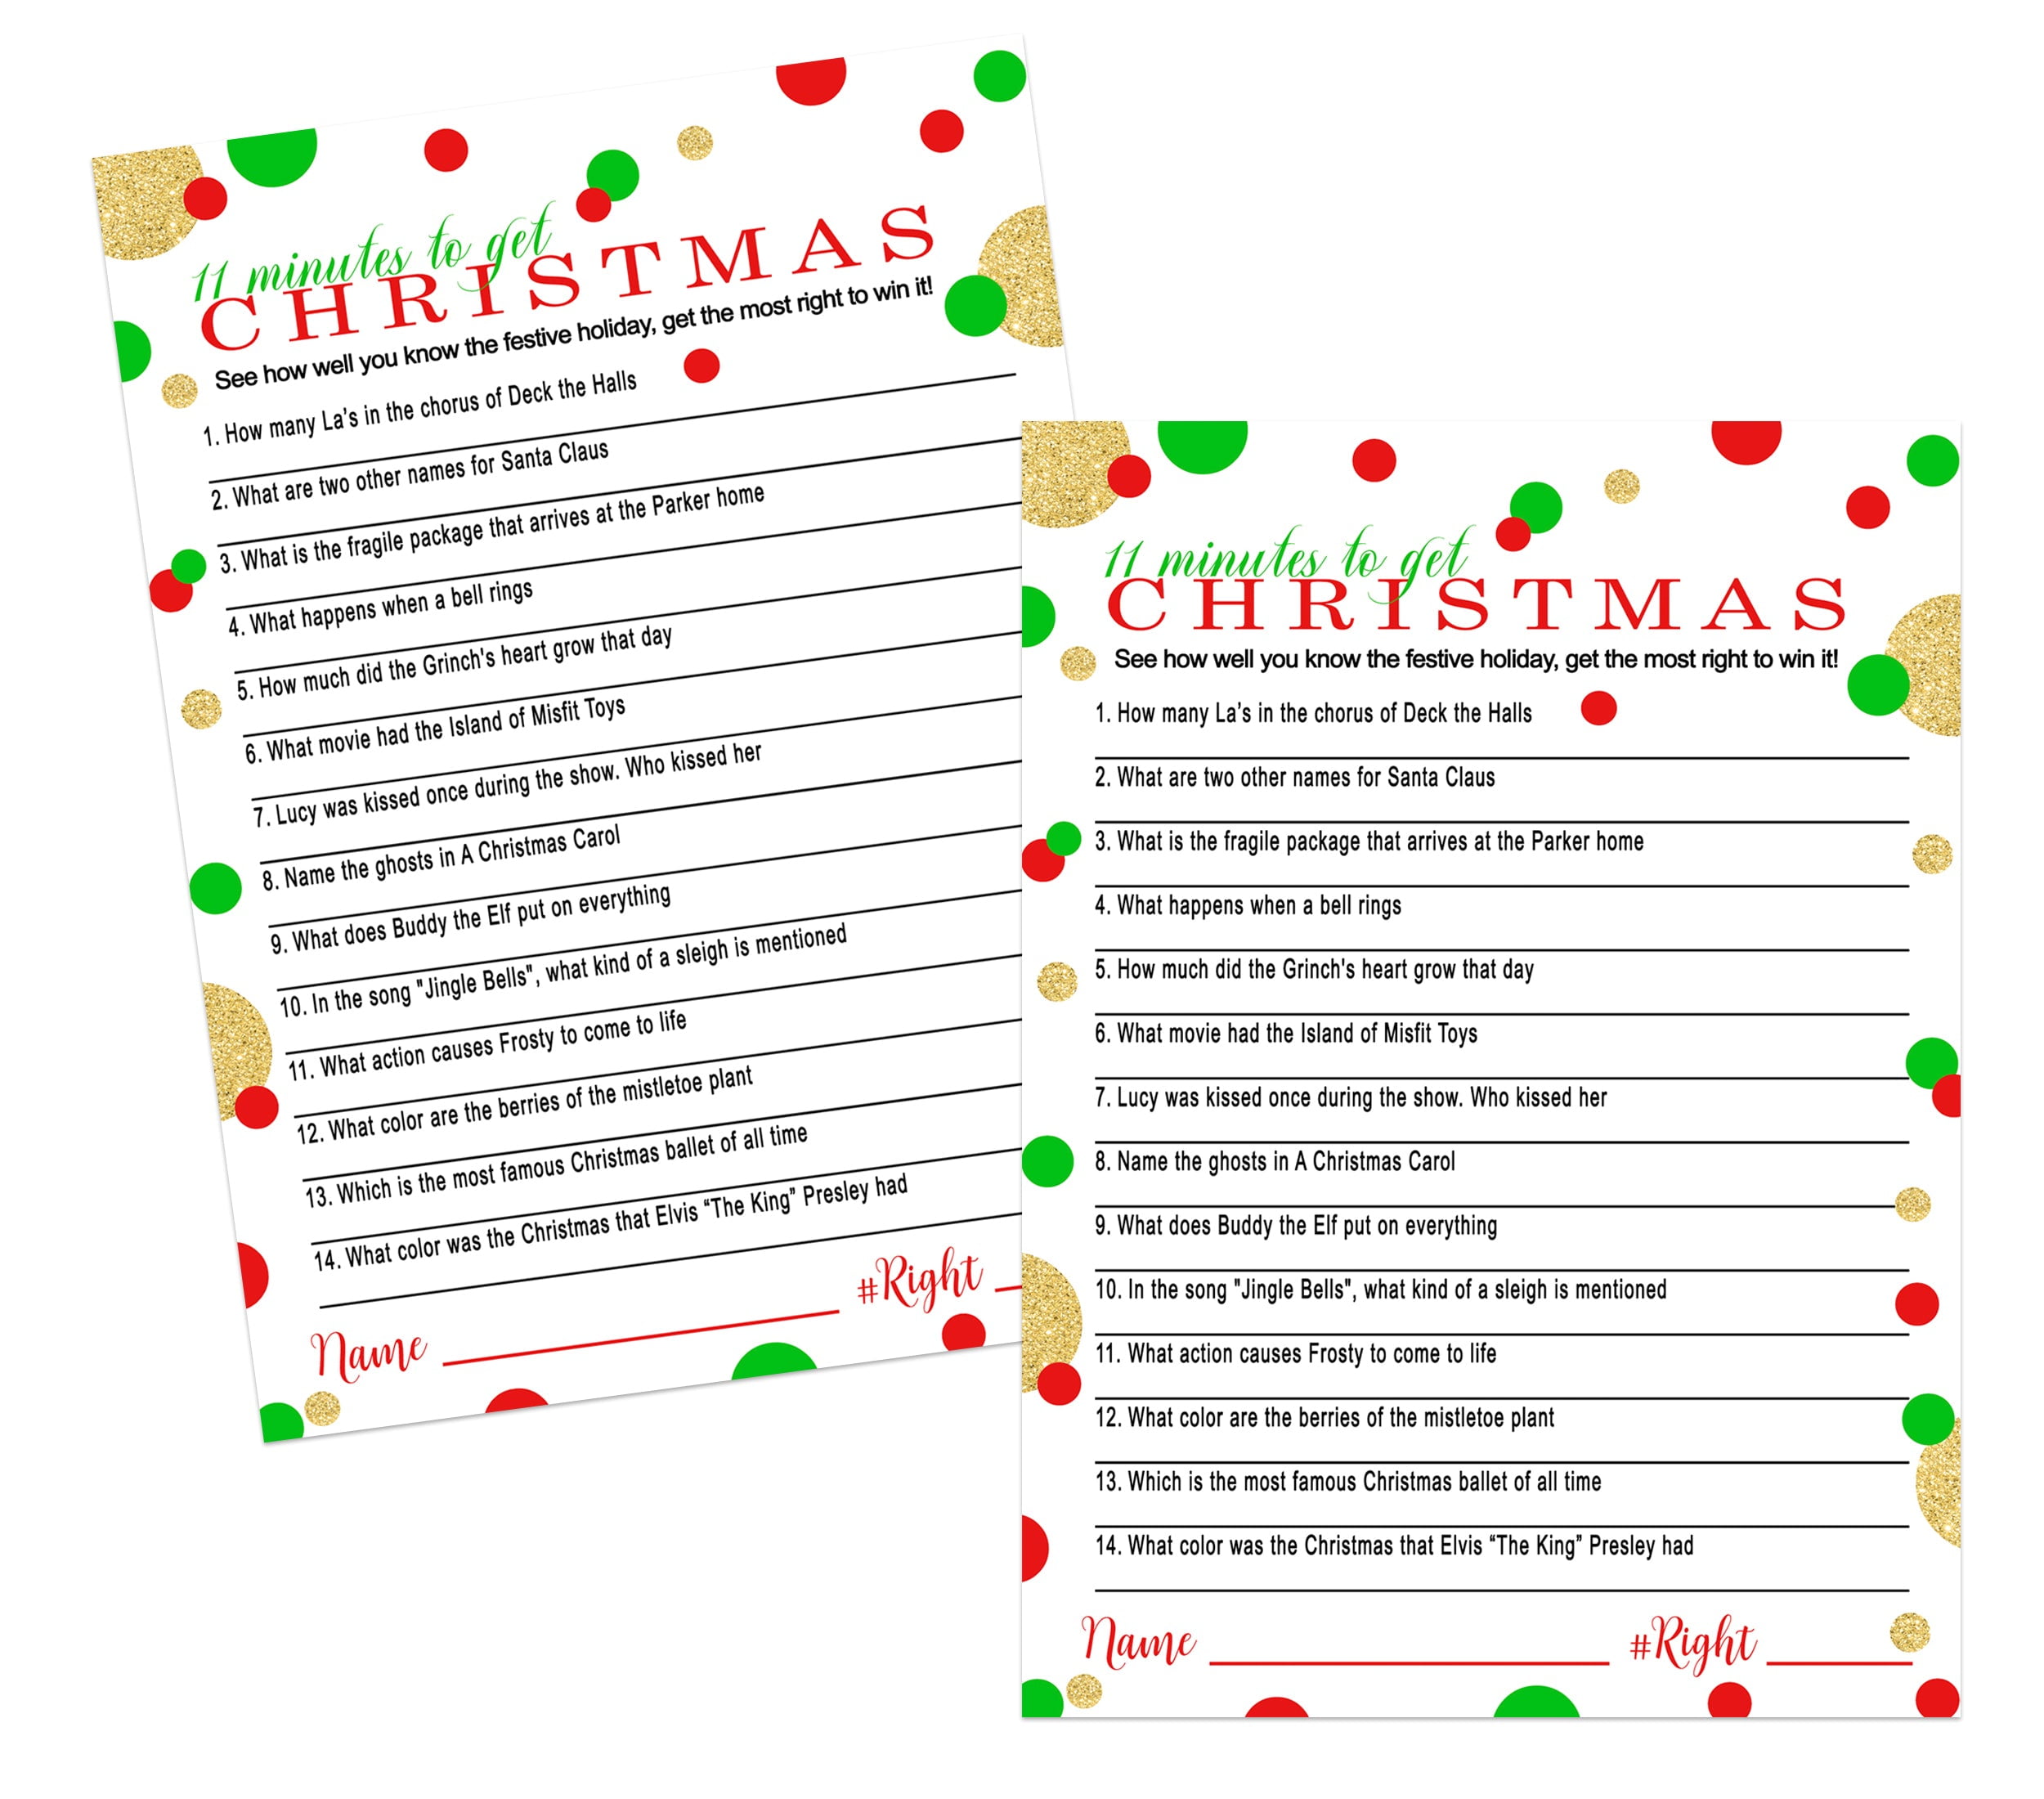 Christmas Trivia Game Cards Version 1 (25 Pack) Festive Holiday Party ...